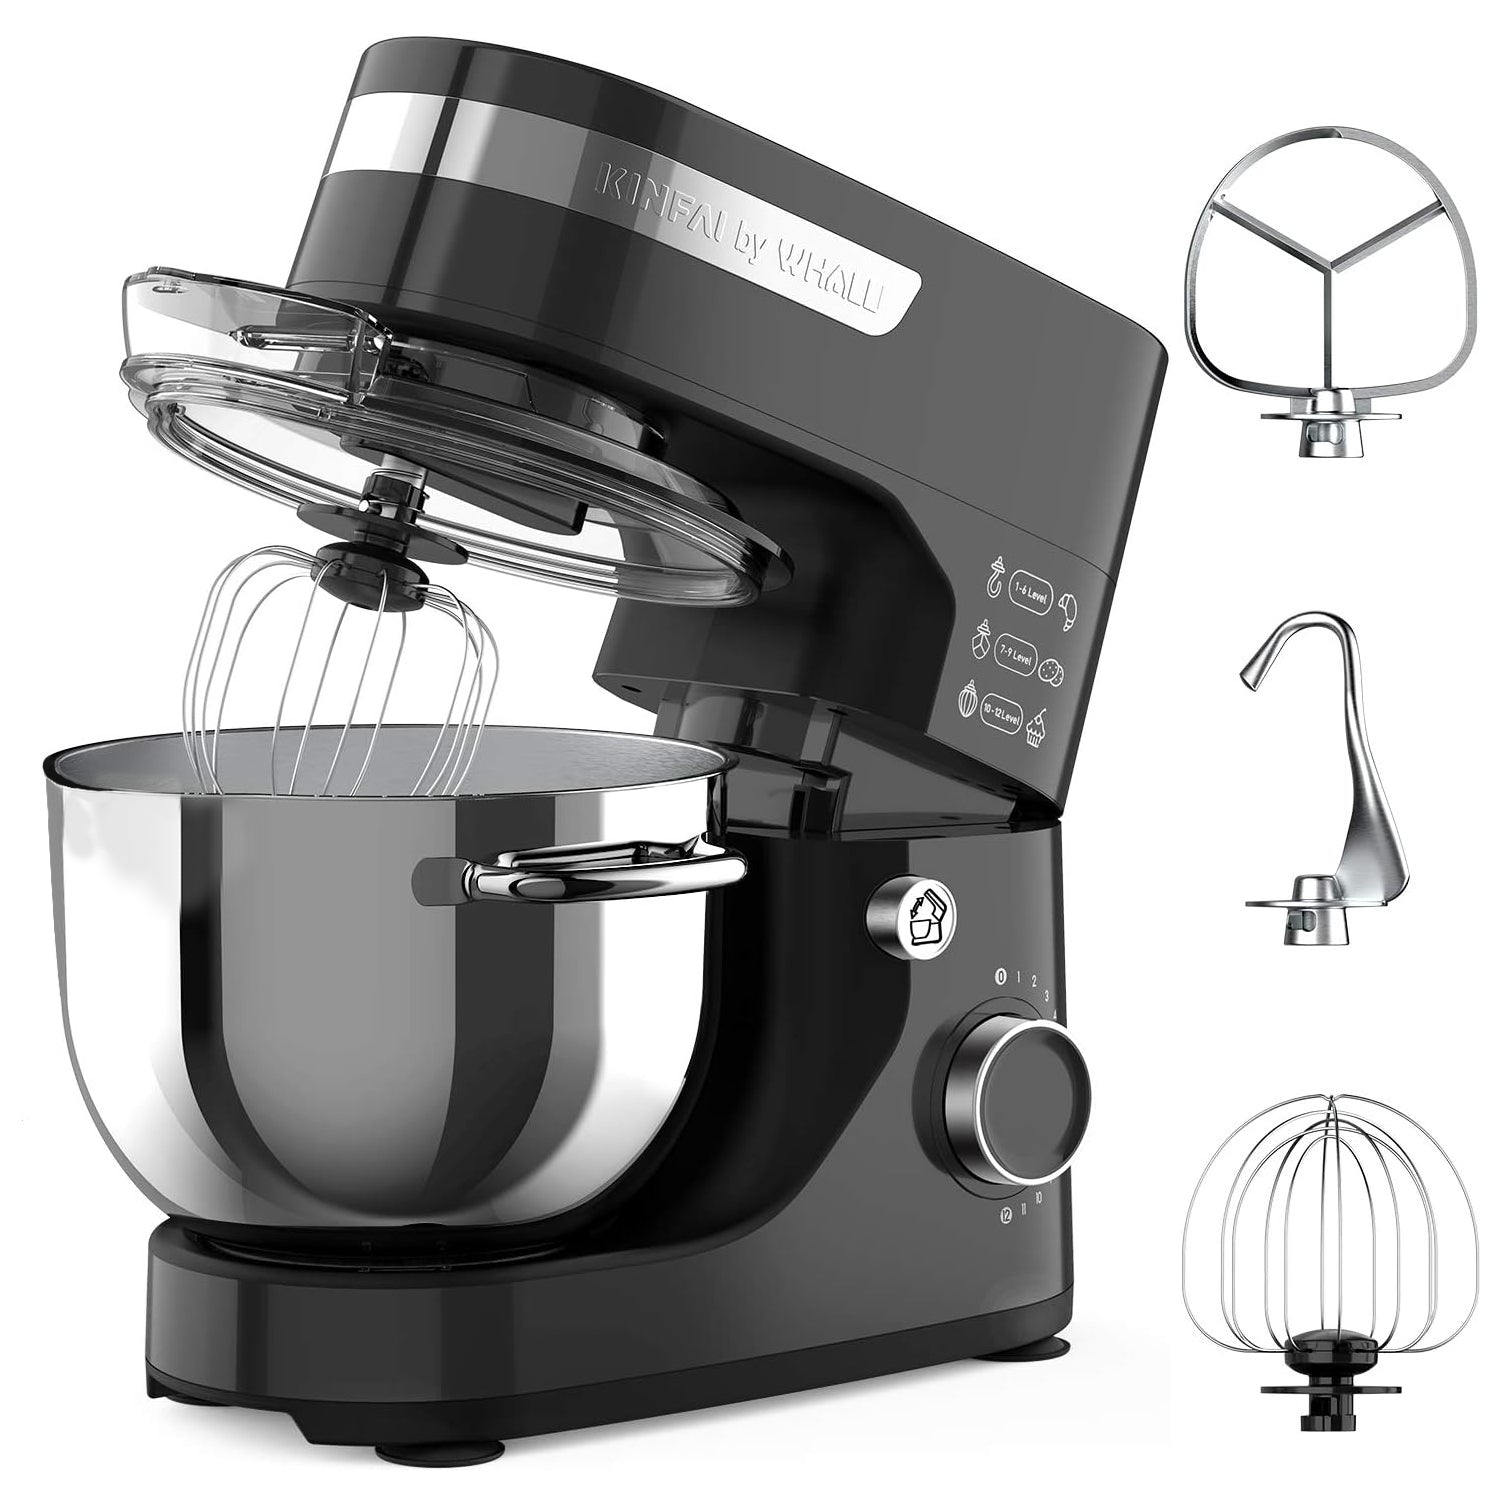 4.3 qt 550 W Tilt-Head Stainless Steel Bowl Electric Food Stand Mixer, Black